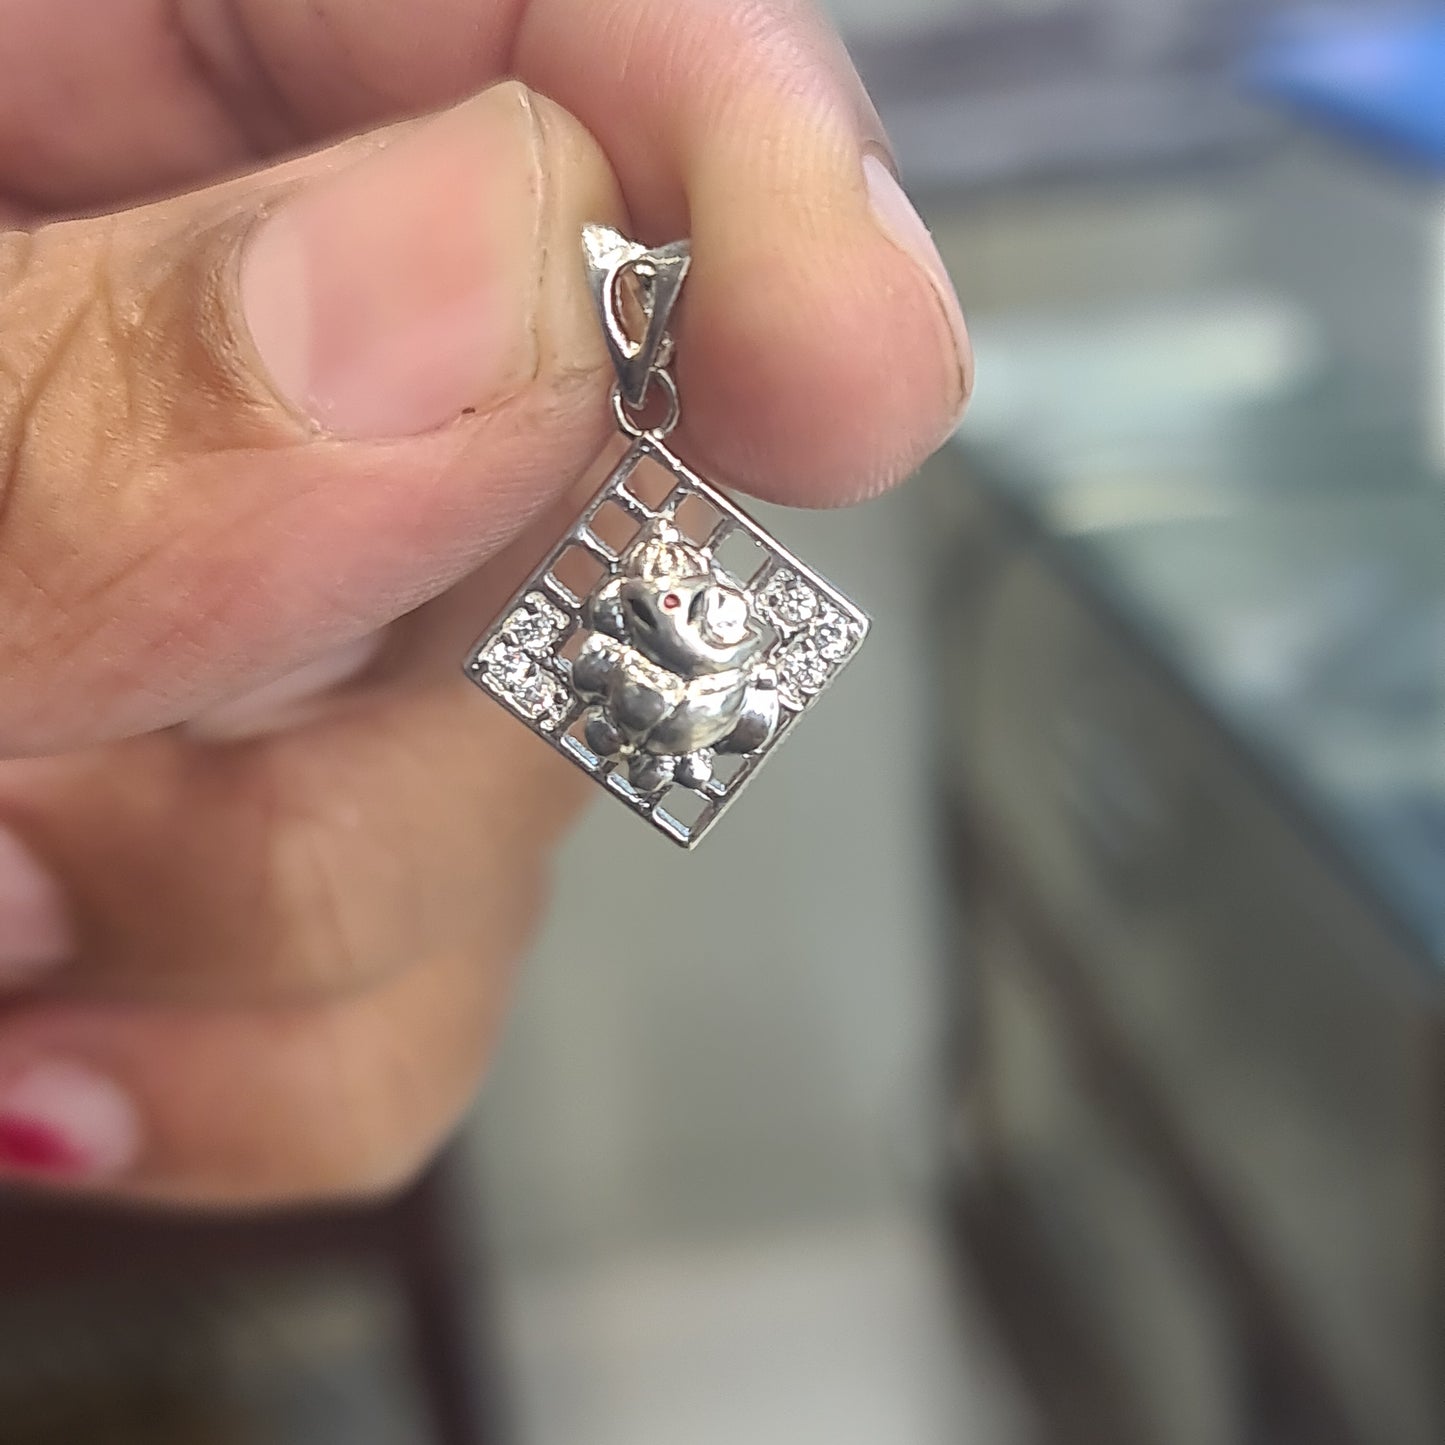 Shine Bright with Silver: Exquisite 92.5 Ganesh Pendant"